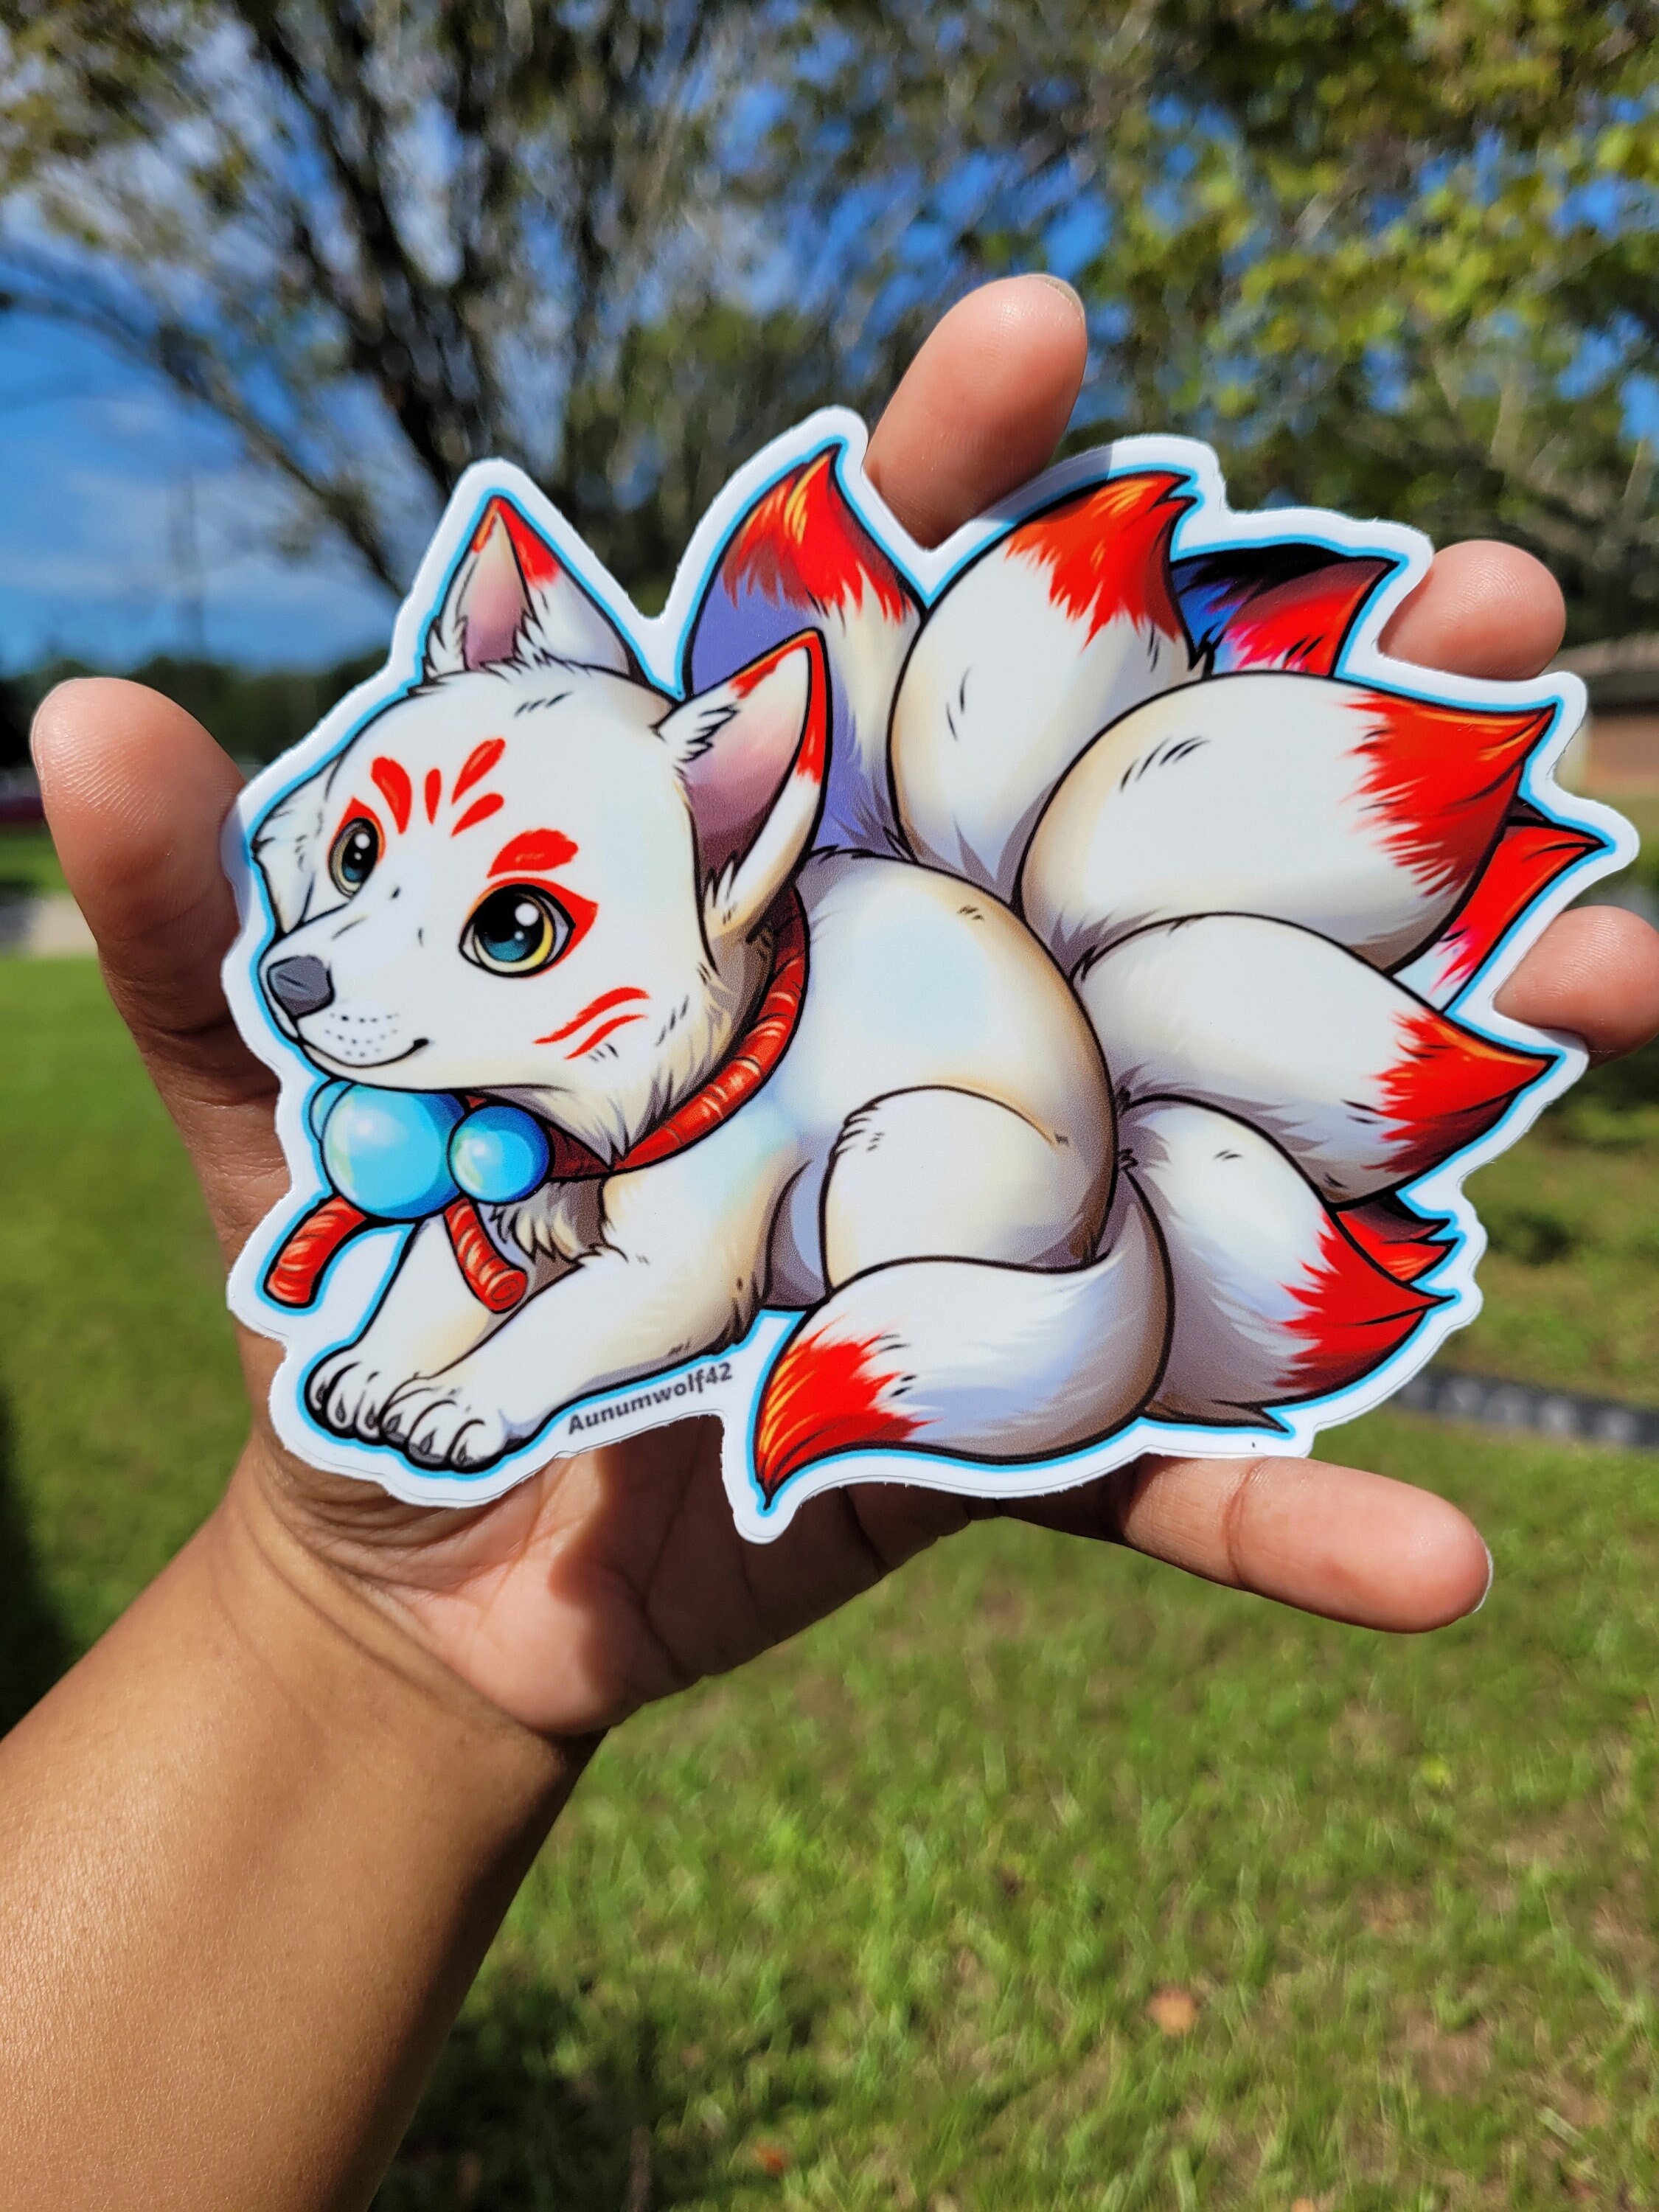 Naruto Nine-Tails Sticker – King of the Pin